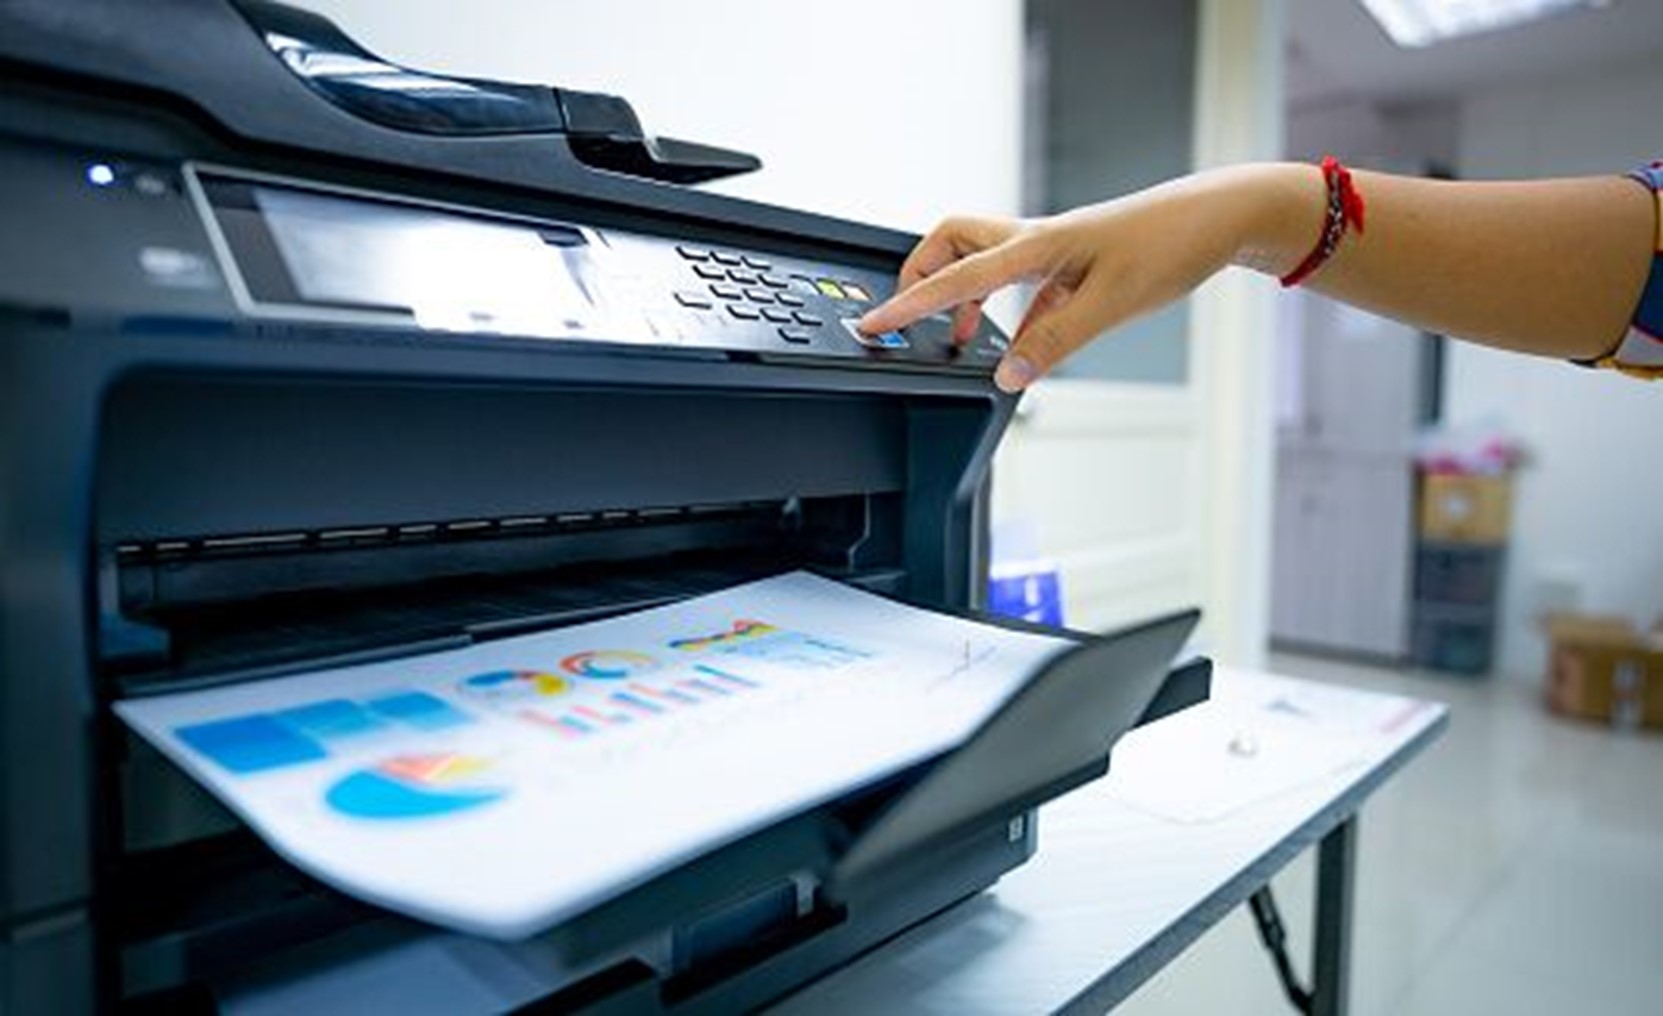 Most Common Printer Issues